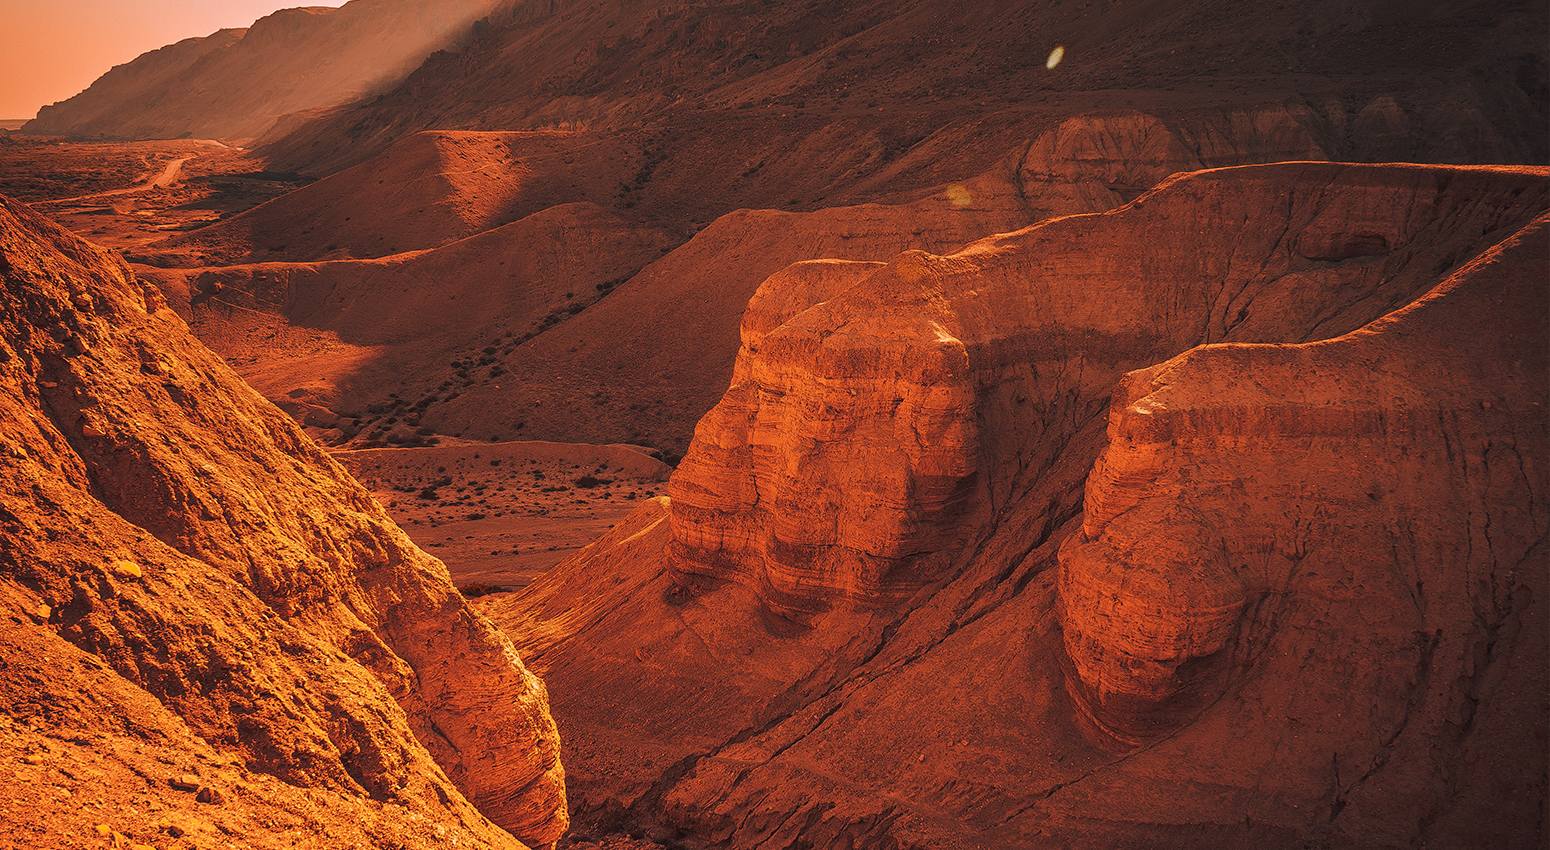 The landscape of Wadi Rum in Jordan with a Bedouin camp